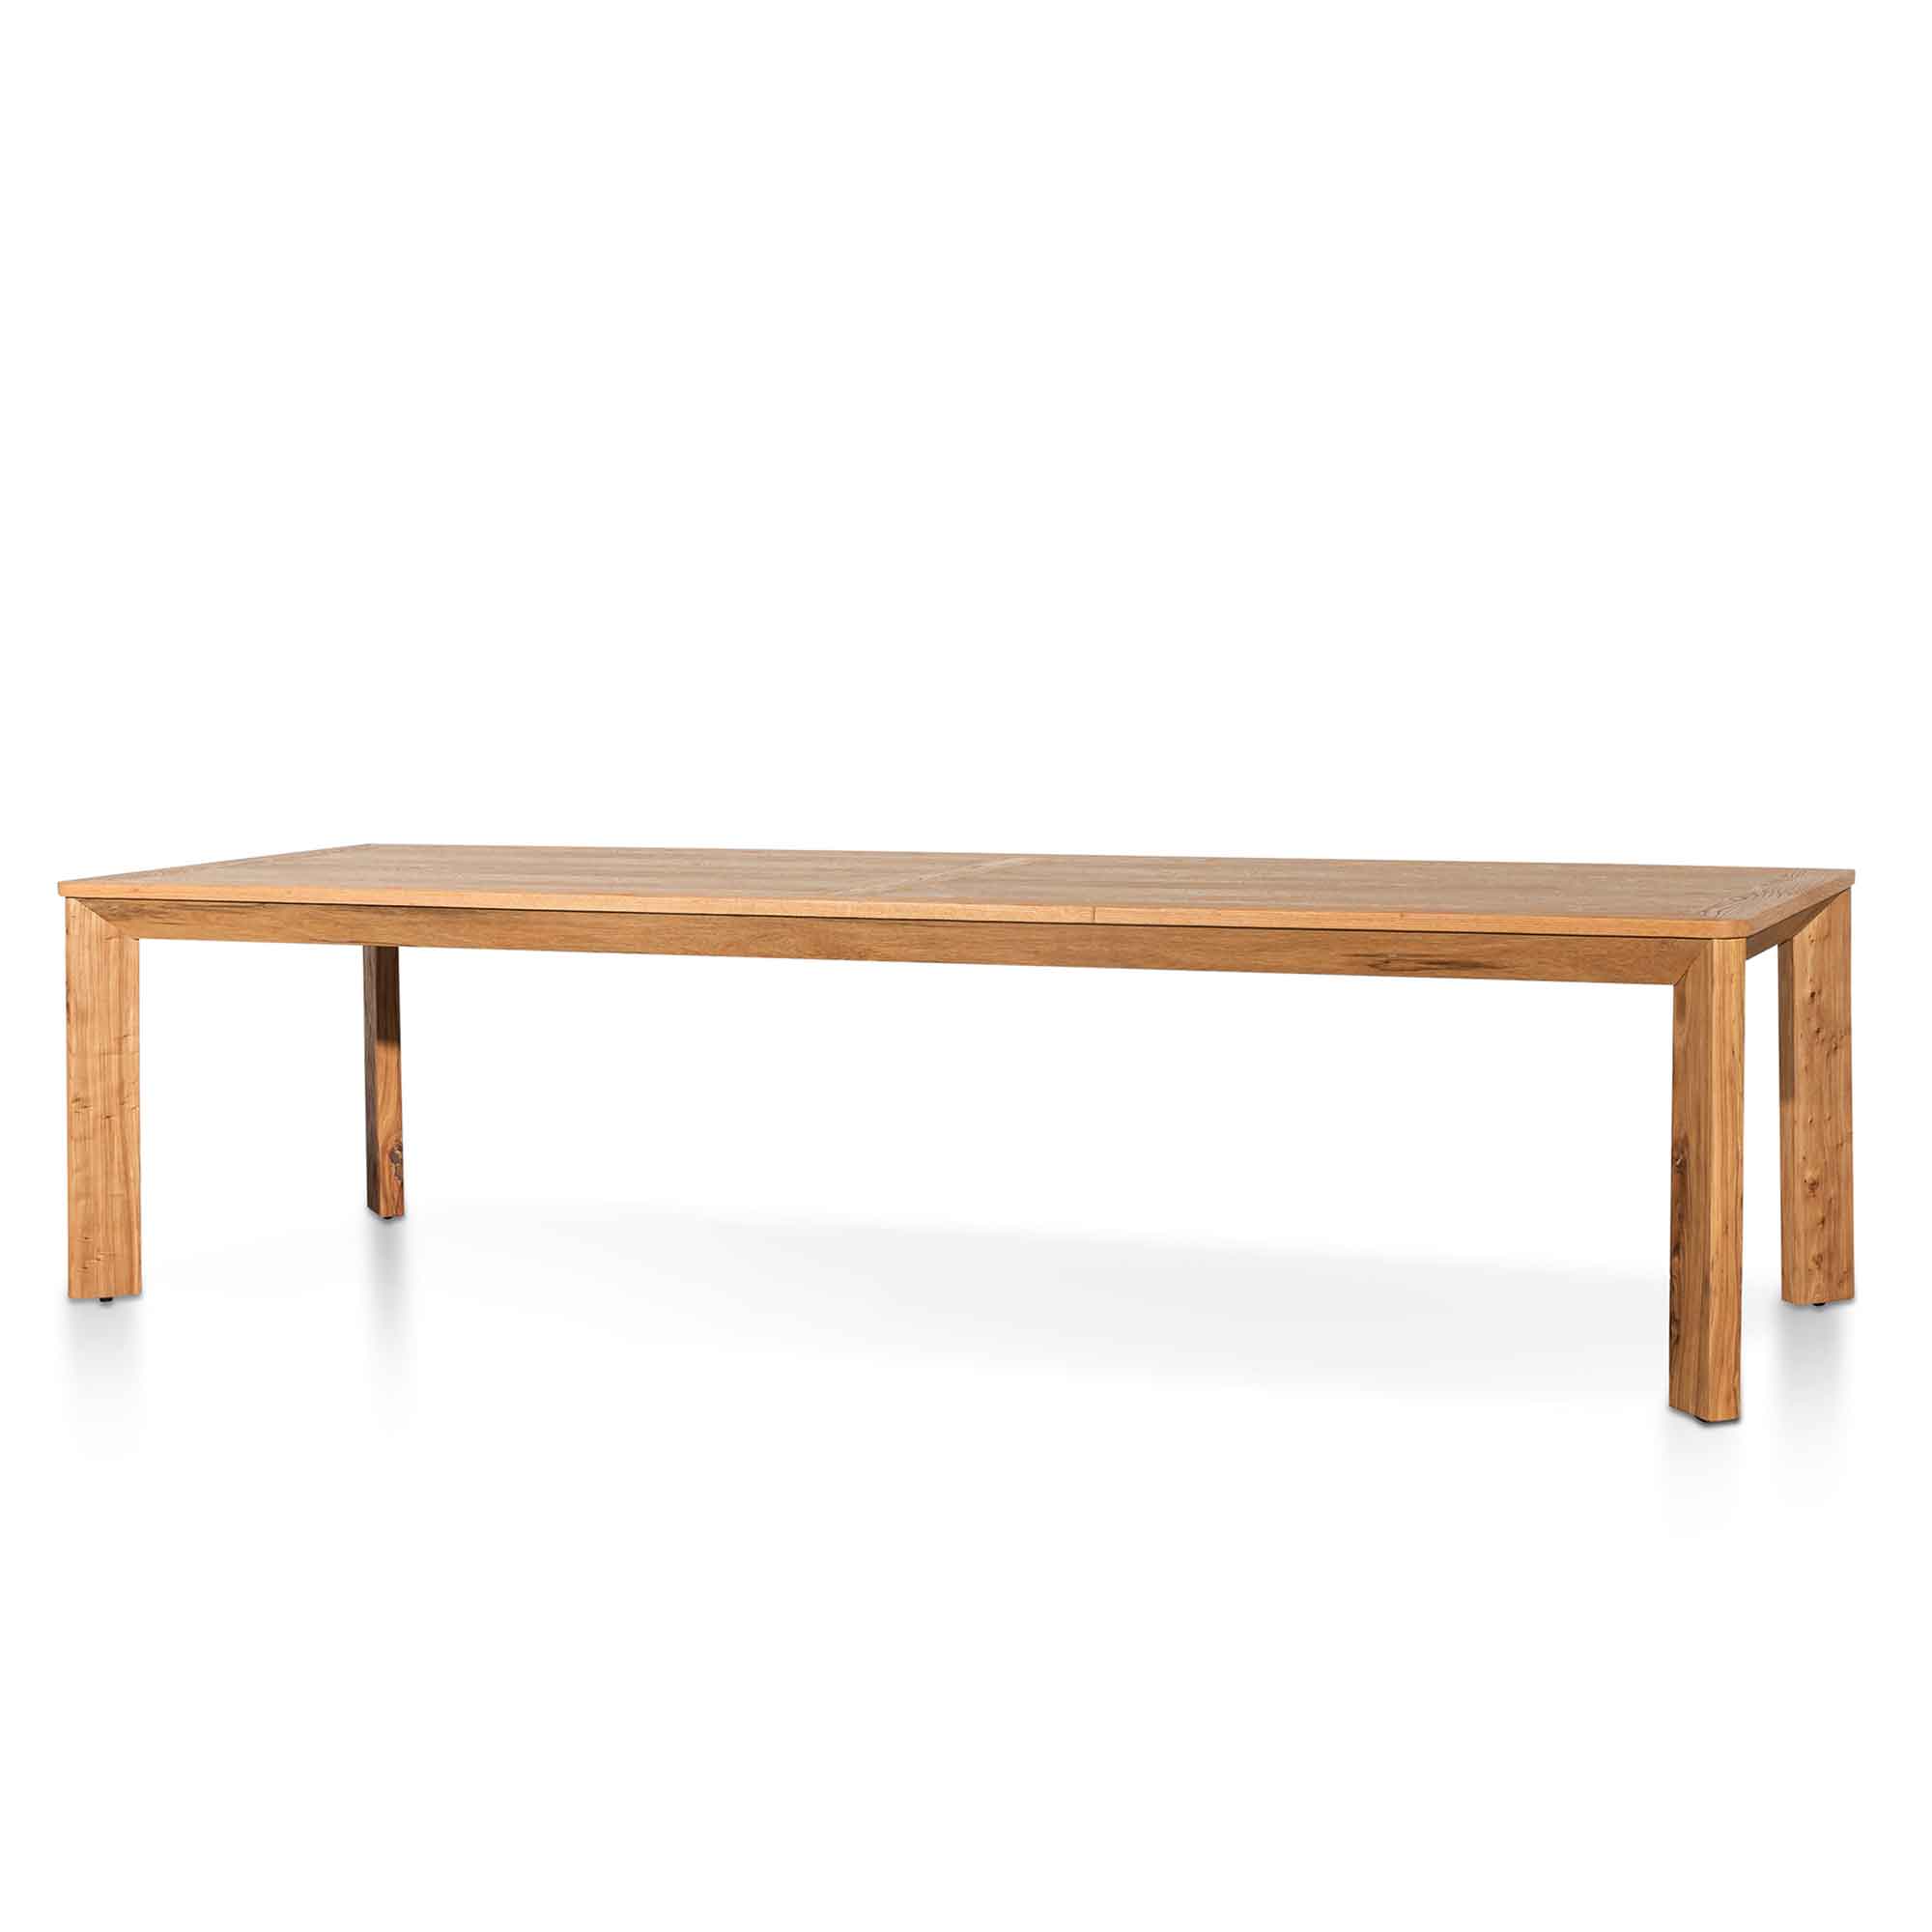 Reese 3m Wood Dining Table - Elm Distress Natural - Dining Tables